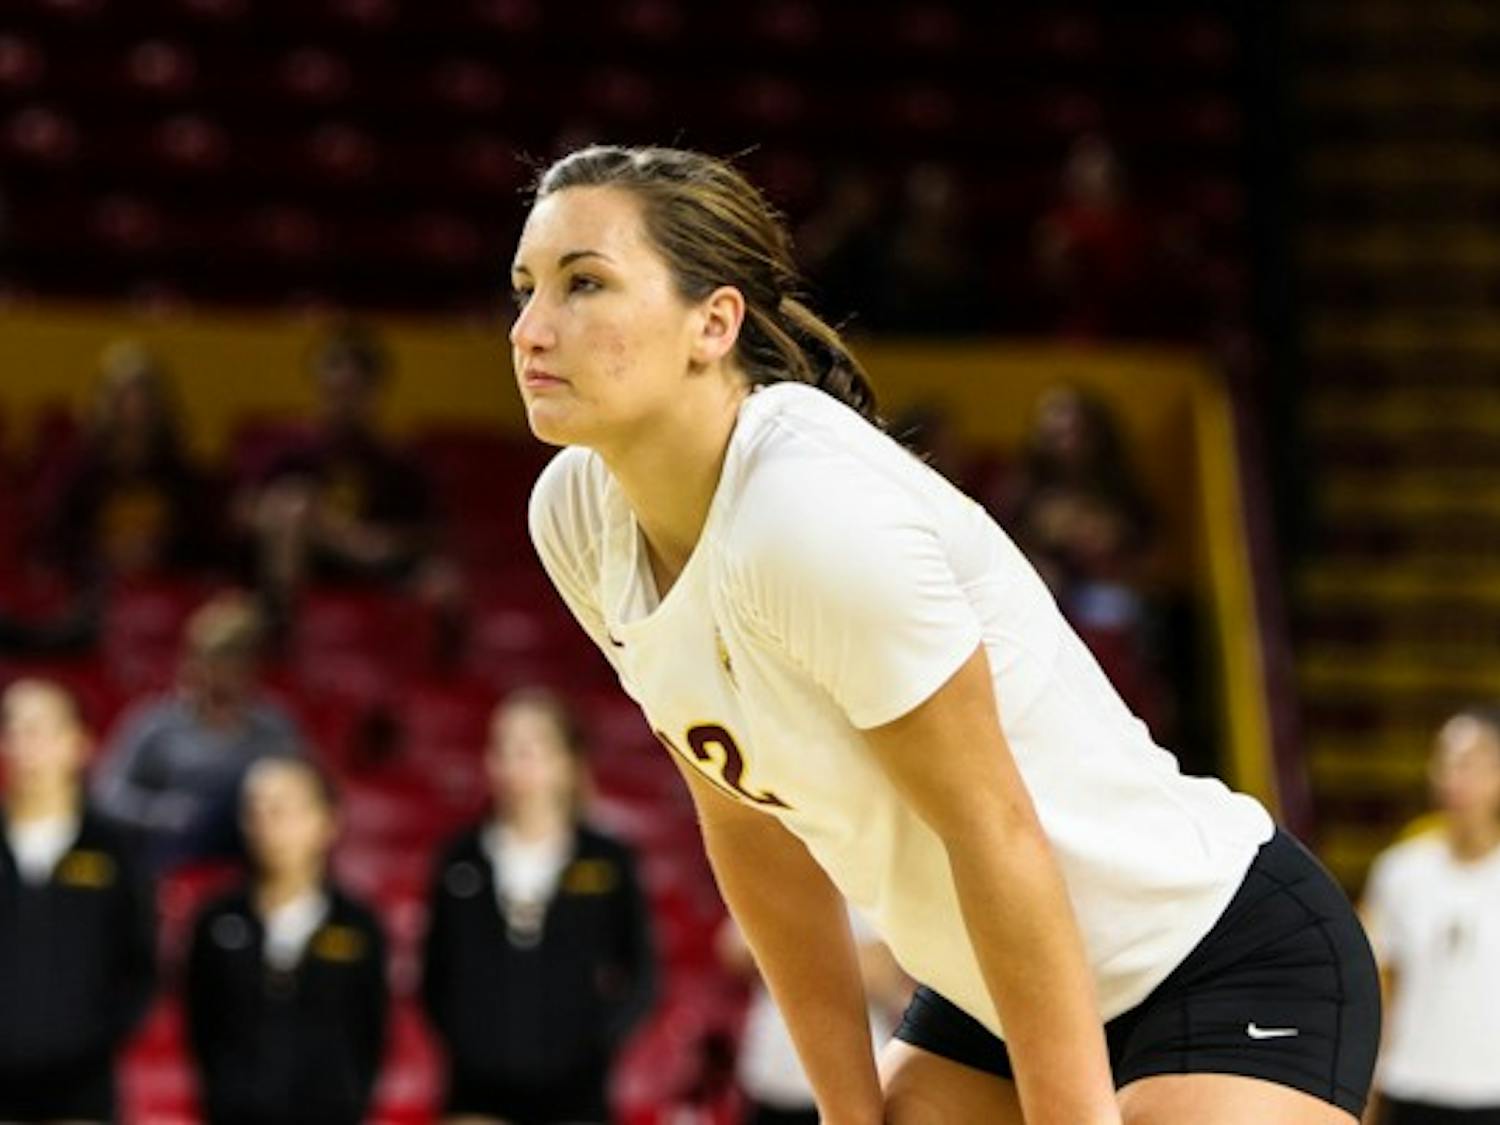 Junior outside hitter Macey Gardner waits for a serve during the game against Colorado on November 2nd, 2014. The Sun Devils' late comeback attempt came up short vs the Buffs as they lost 3-2. (Photo by Daniel Kwon)